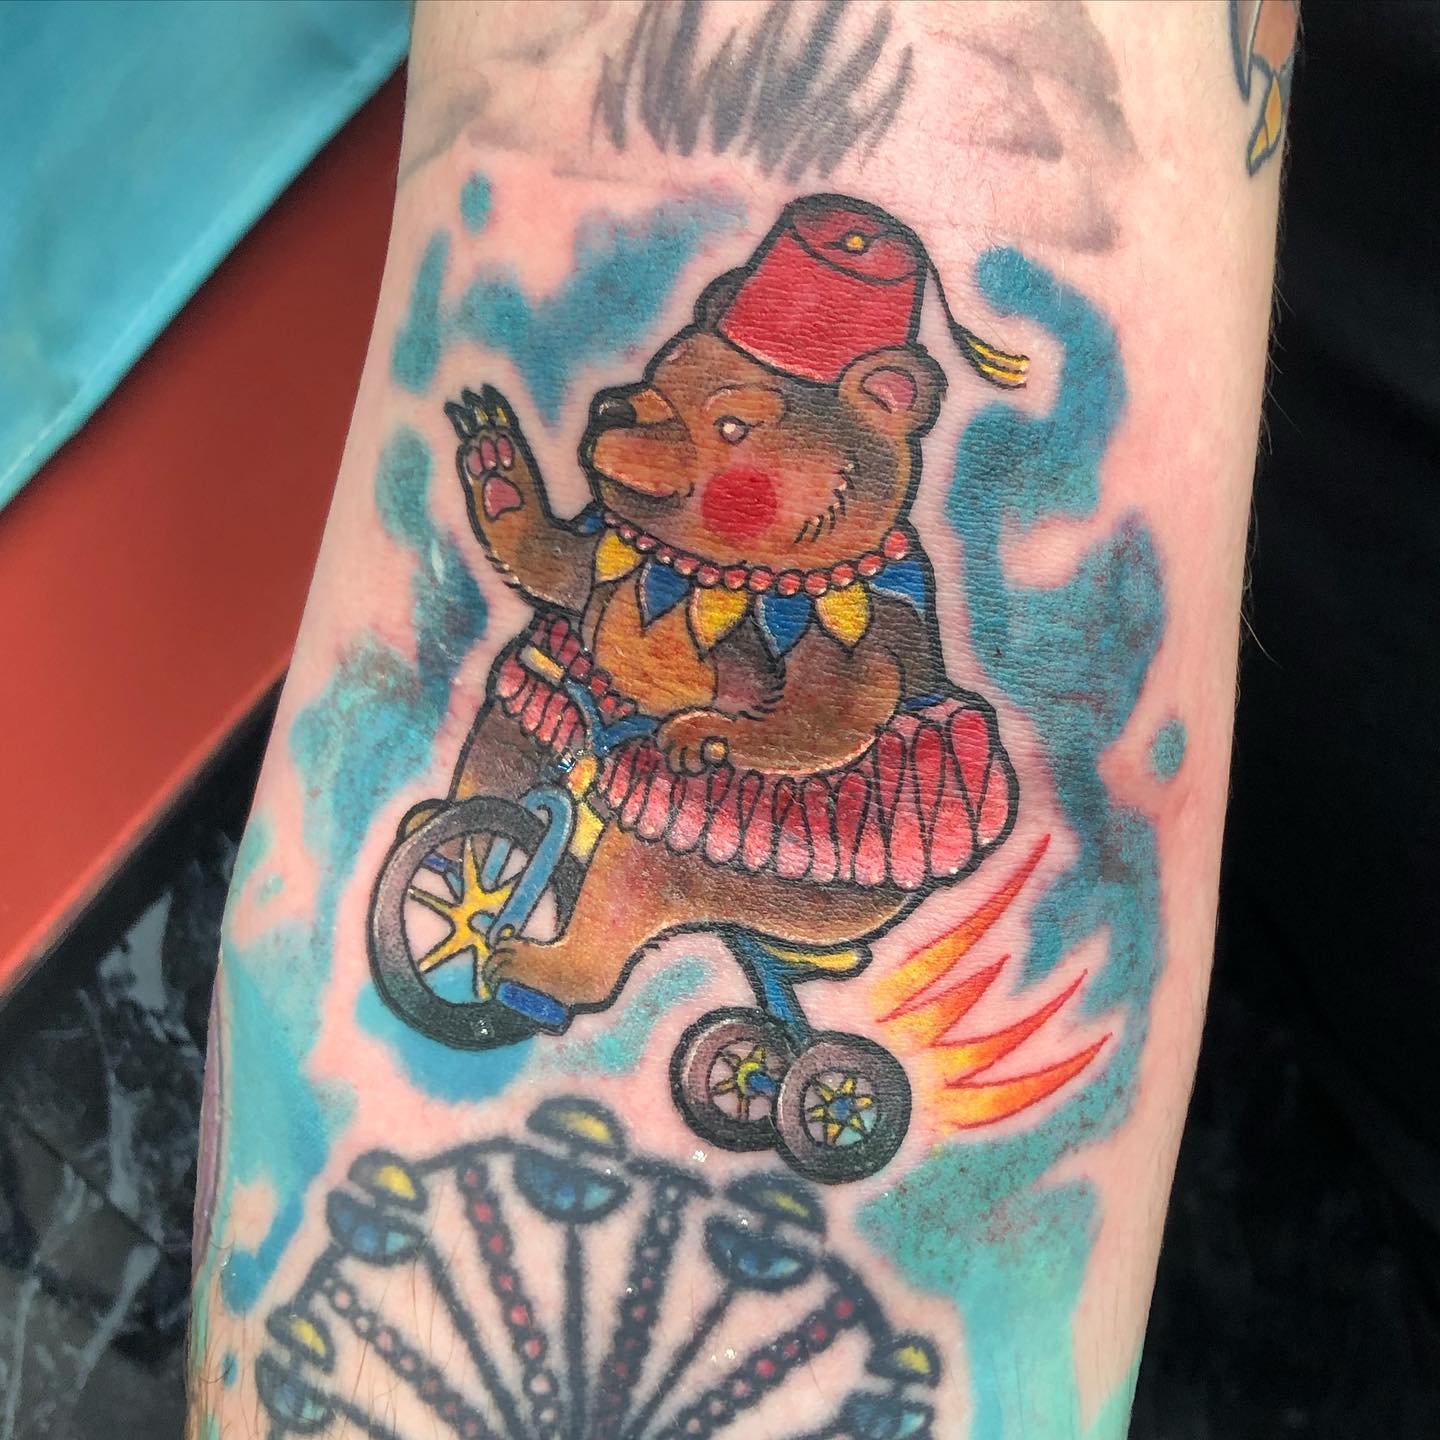 Circus Bear for Dean in the elbow ditch. Thank you so much for your excellent ideas. ⋆ Studio XIII Gallery